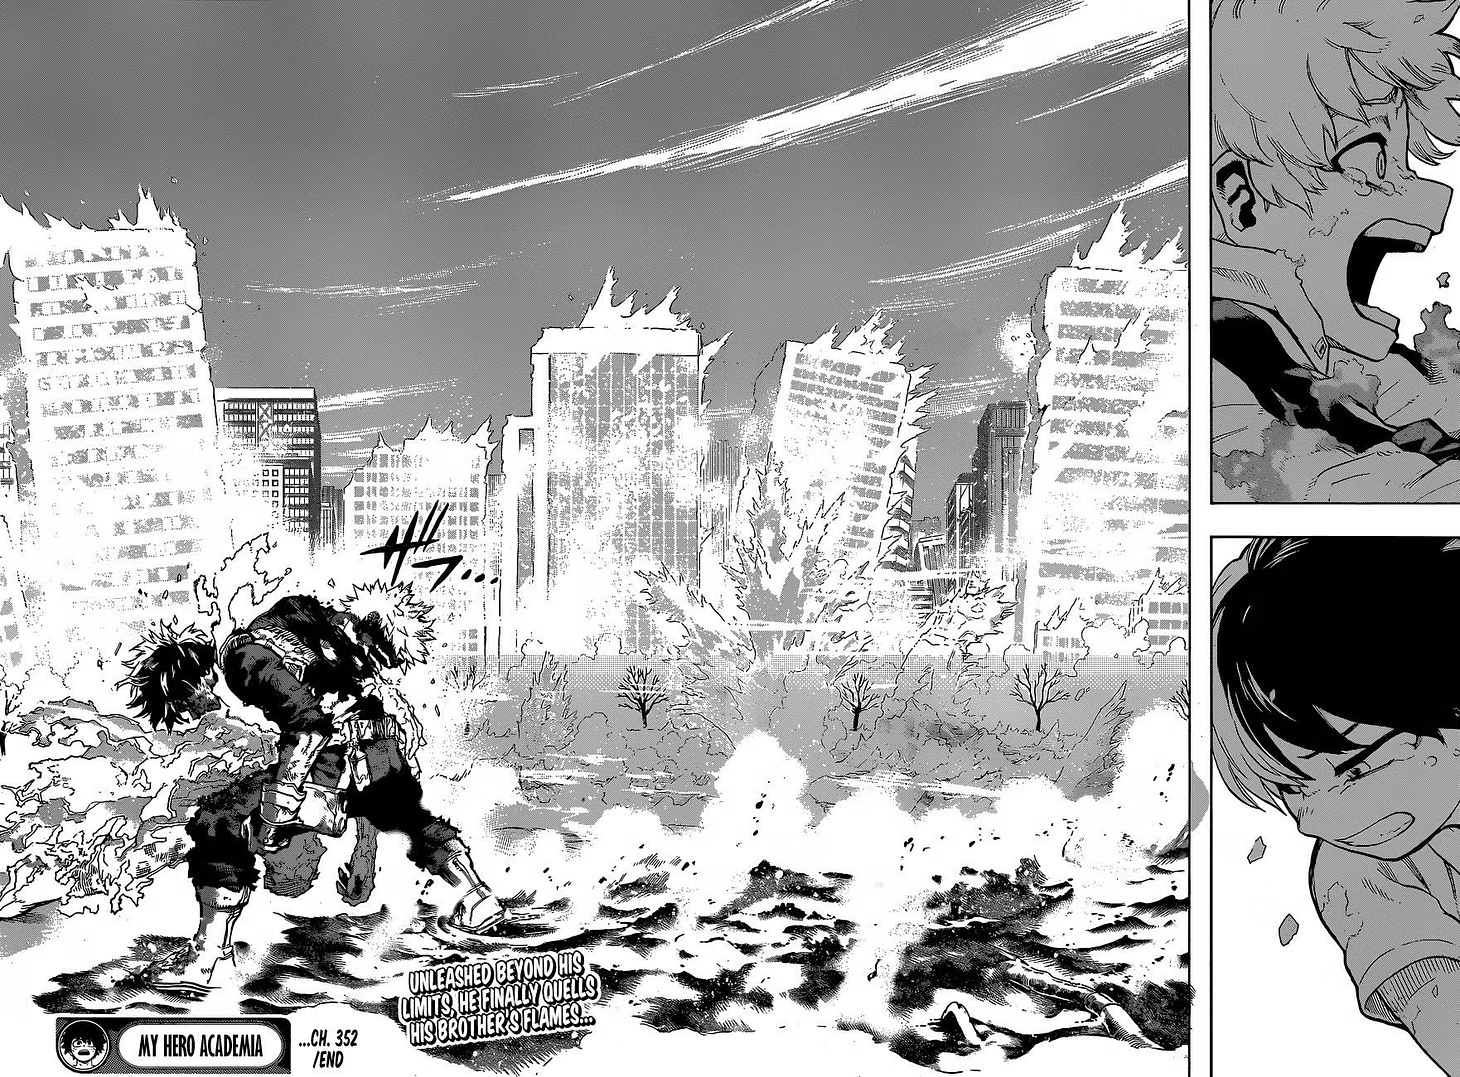 My-Hero-Academia-Chapter-390-Review-Latest-Chapter-Shattered-Expectations-Fans-Disappointed